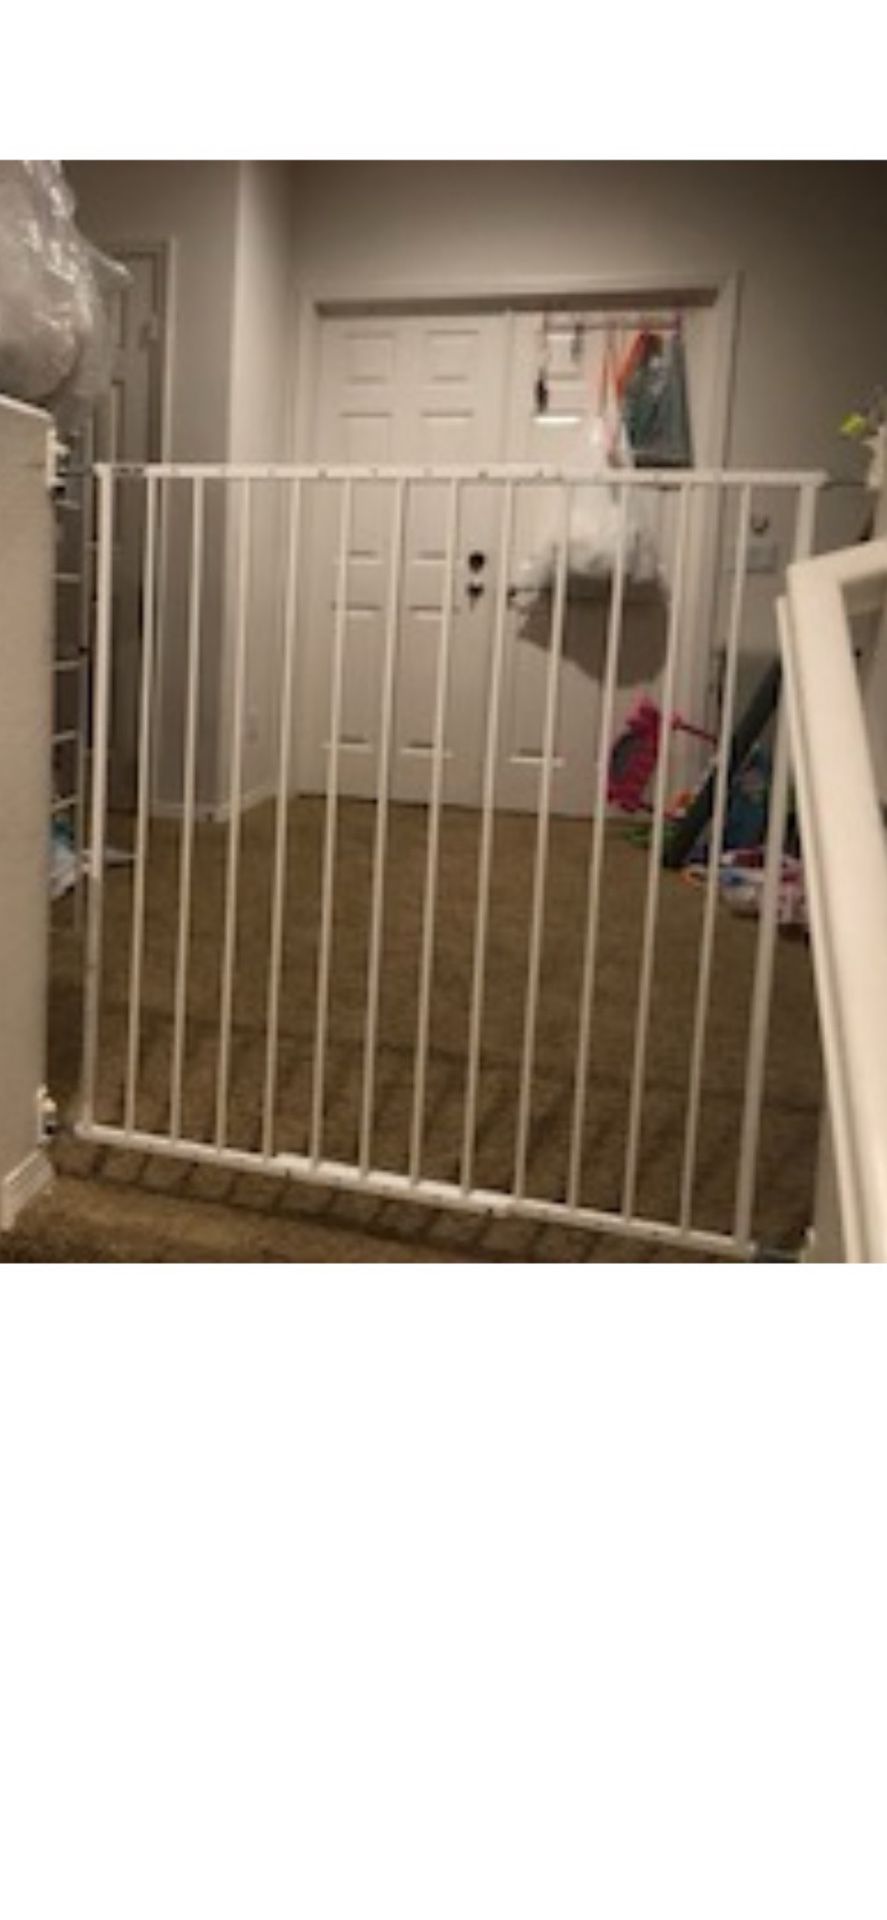 Security Gate For Toddlers - $30